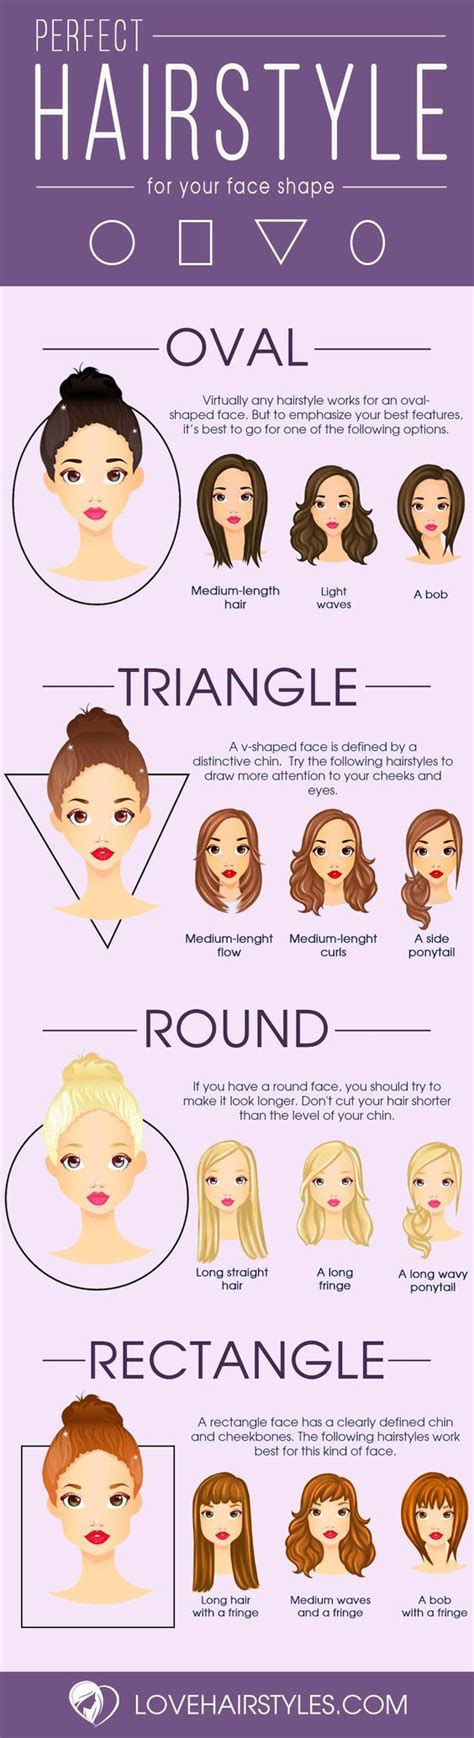 Fresh Ideal Hair Length For Face Shape For Bridesmaids The Ultimate Guide To Wedding Hairstyles